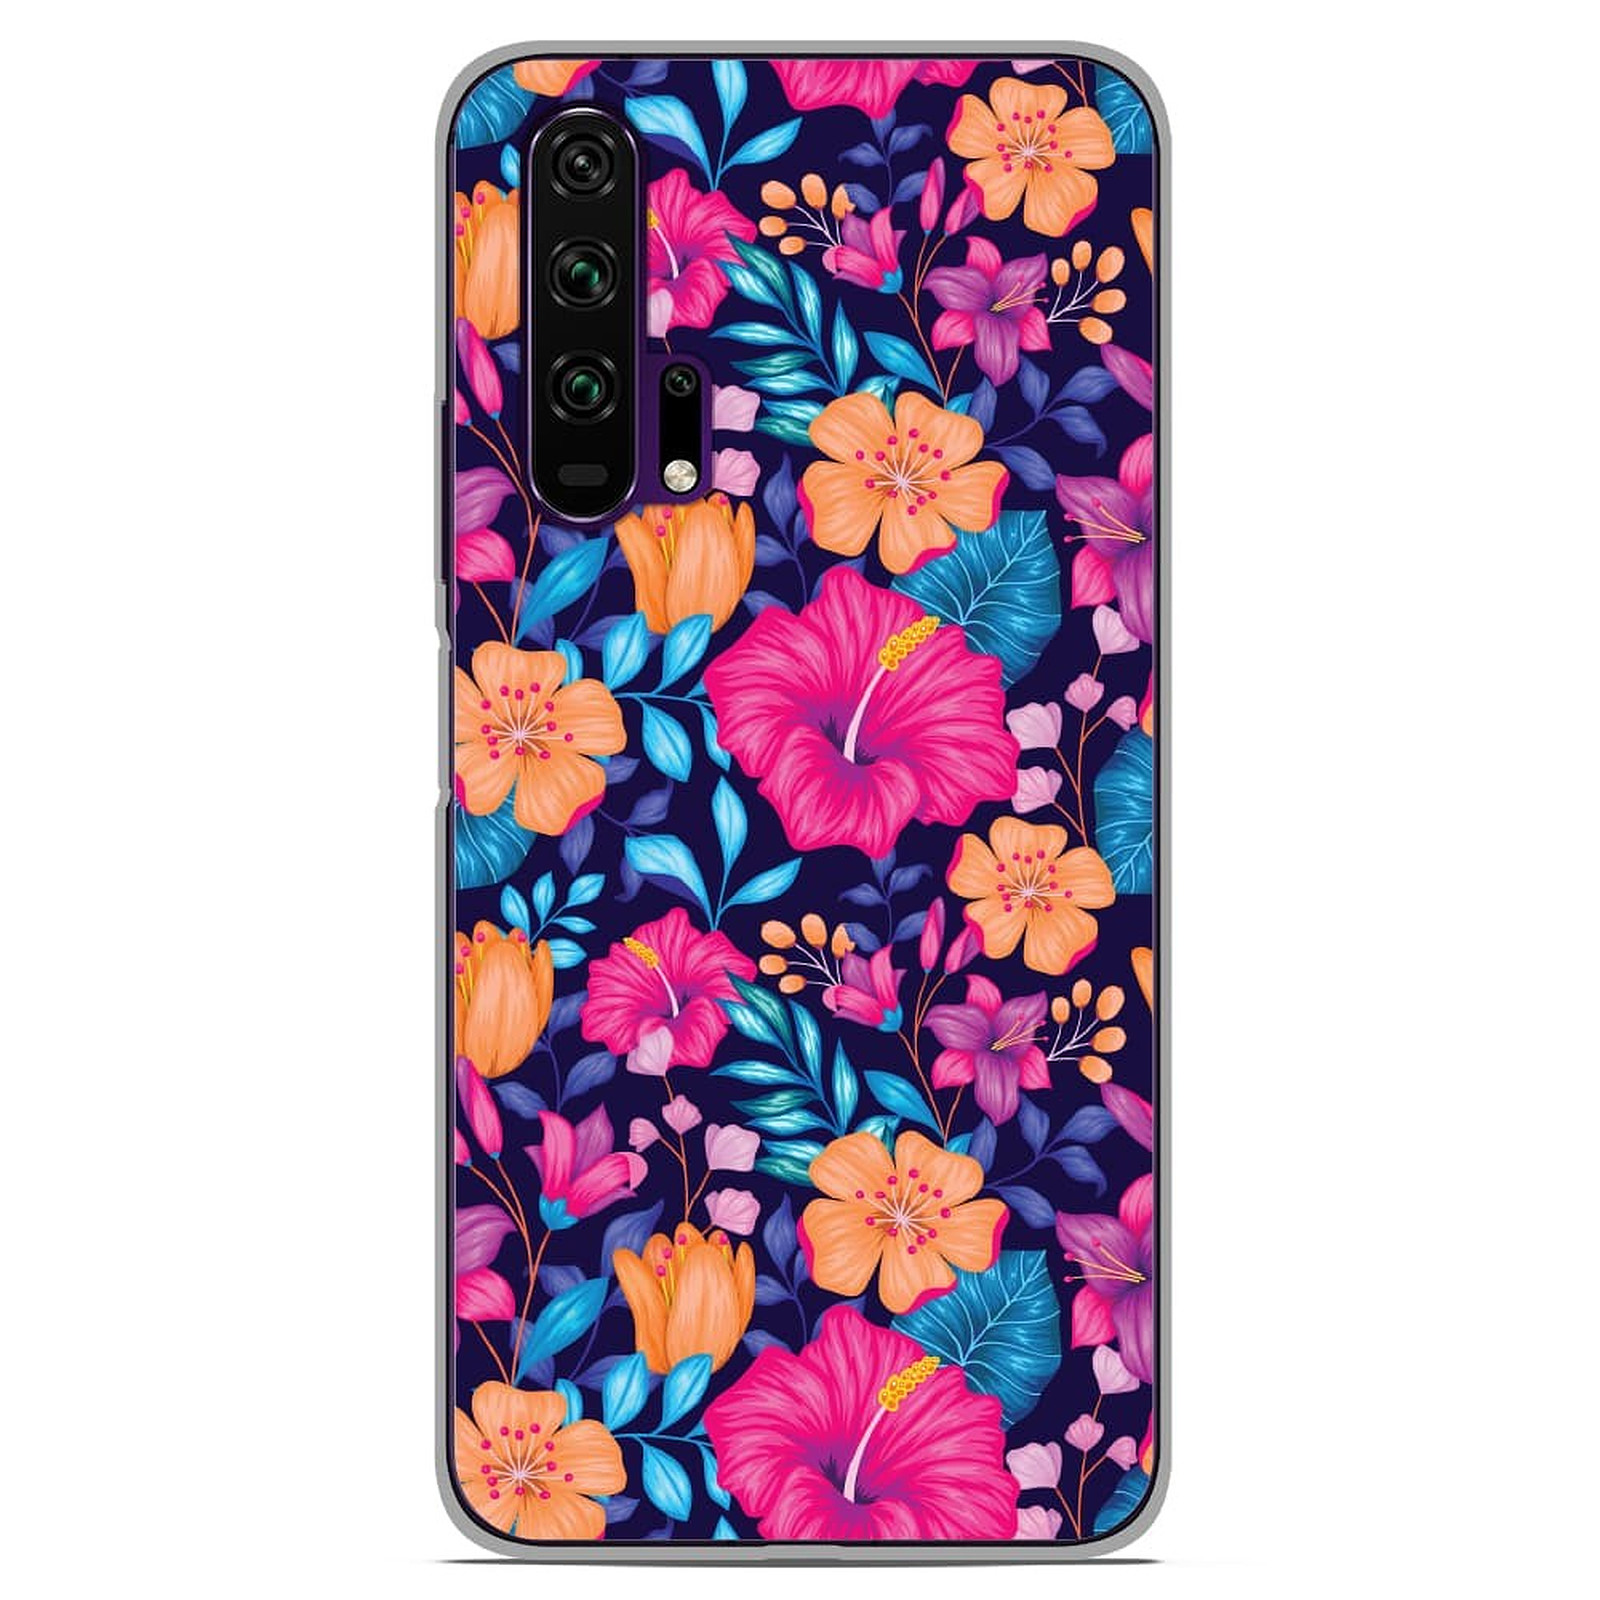 1001 Coques Coque silicone gel Huawei Honor 20 Pro motif Fleurs Exotiques - Coque telephone 1001Coques